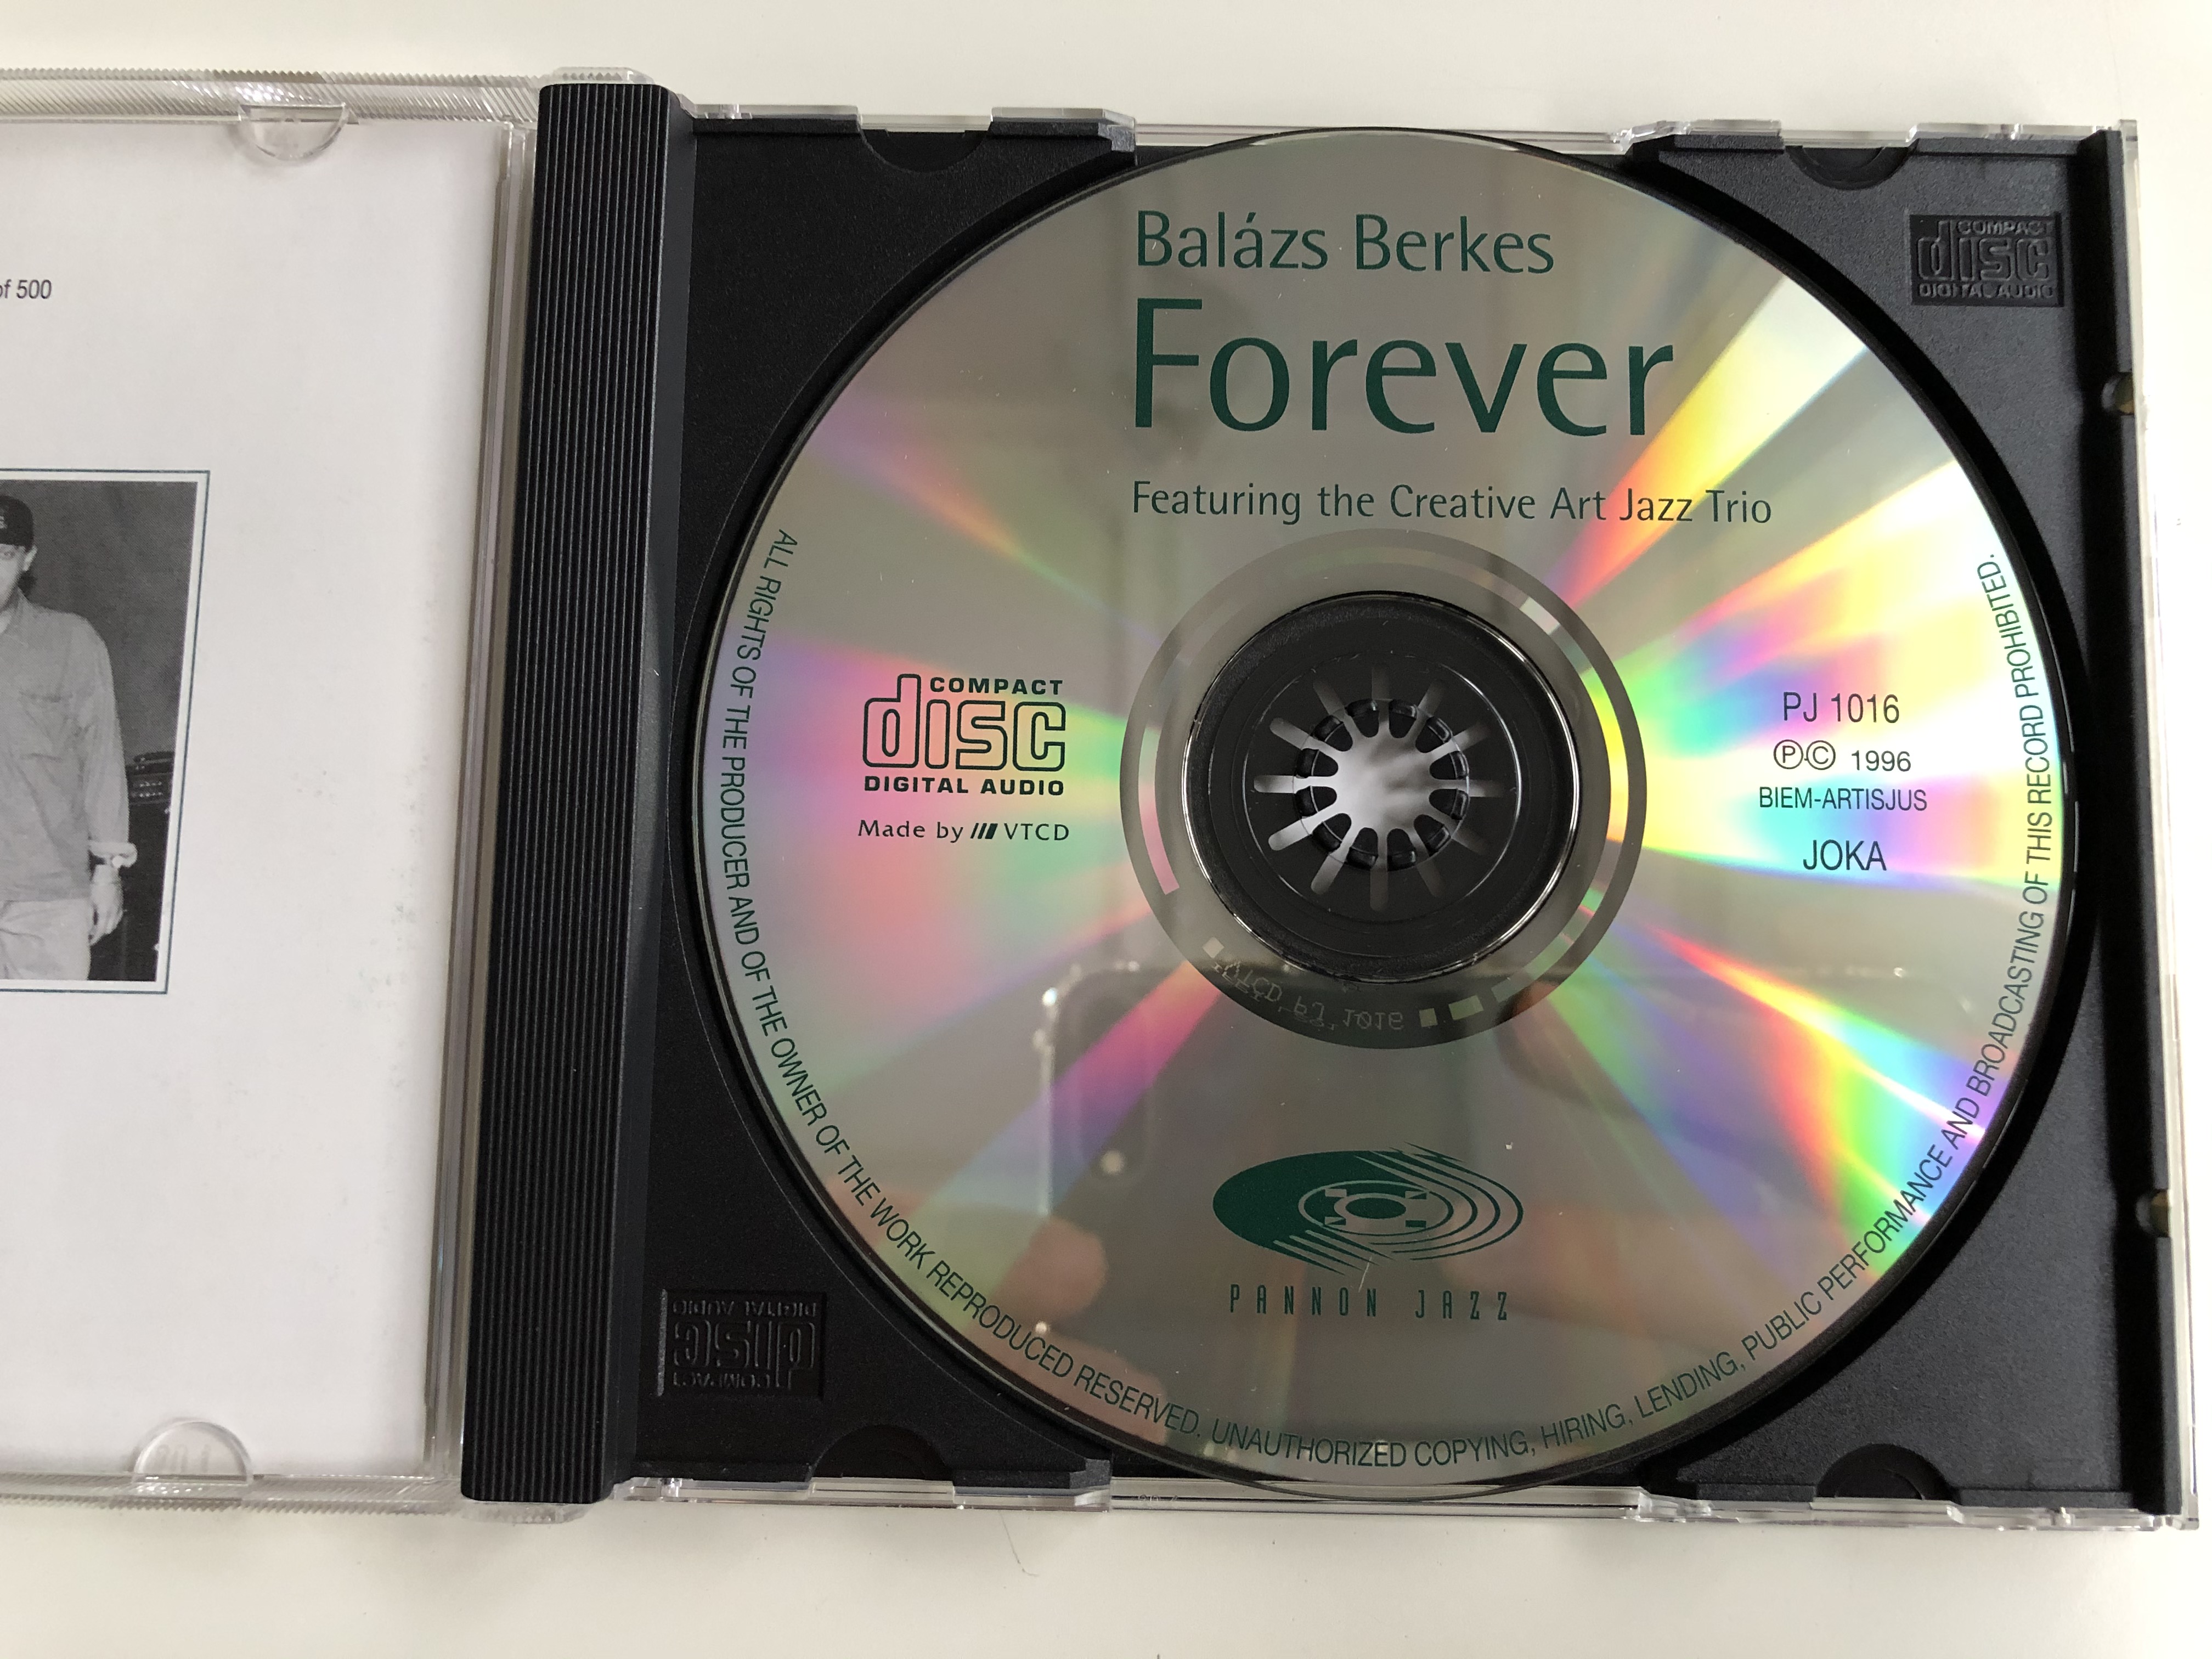 foundation-for-jazz-education-and-resarch-in-hungary-presents-bal-zs-berkes-forever-featuring-the-creative-art-jazz-trio-pannon-jazz-audio-cd-1996-pj-1016-4-.jpg